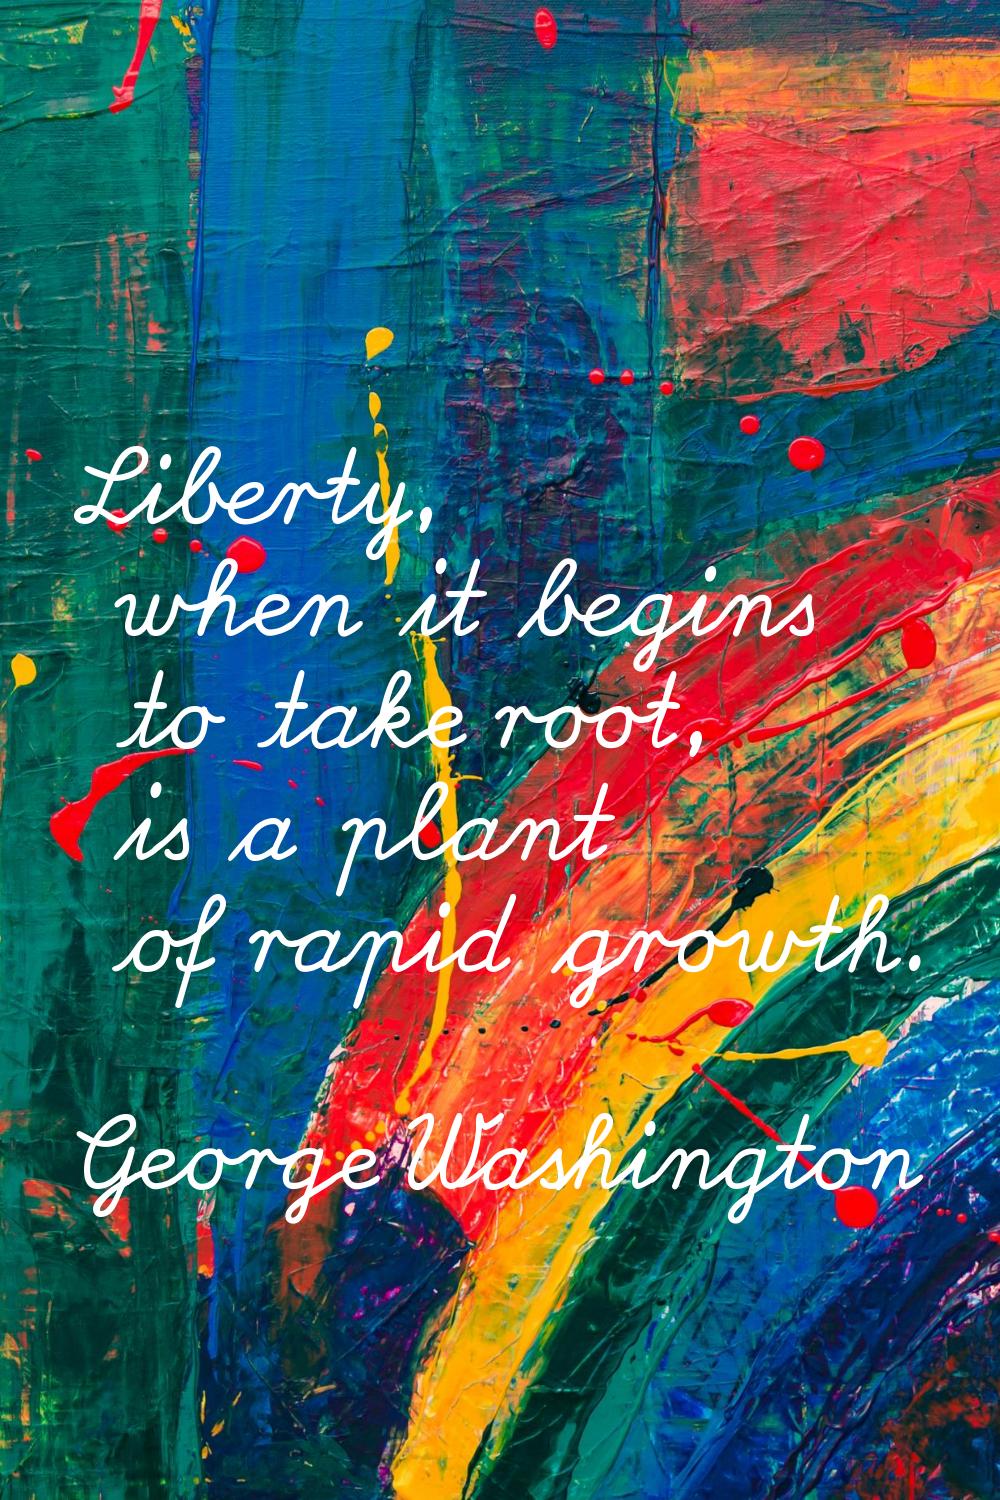 Liberty, when it begins to take root, is a plant of rapid growth.